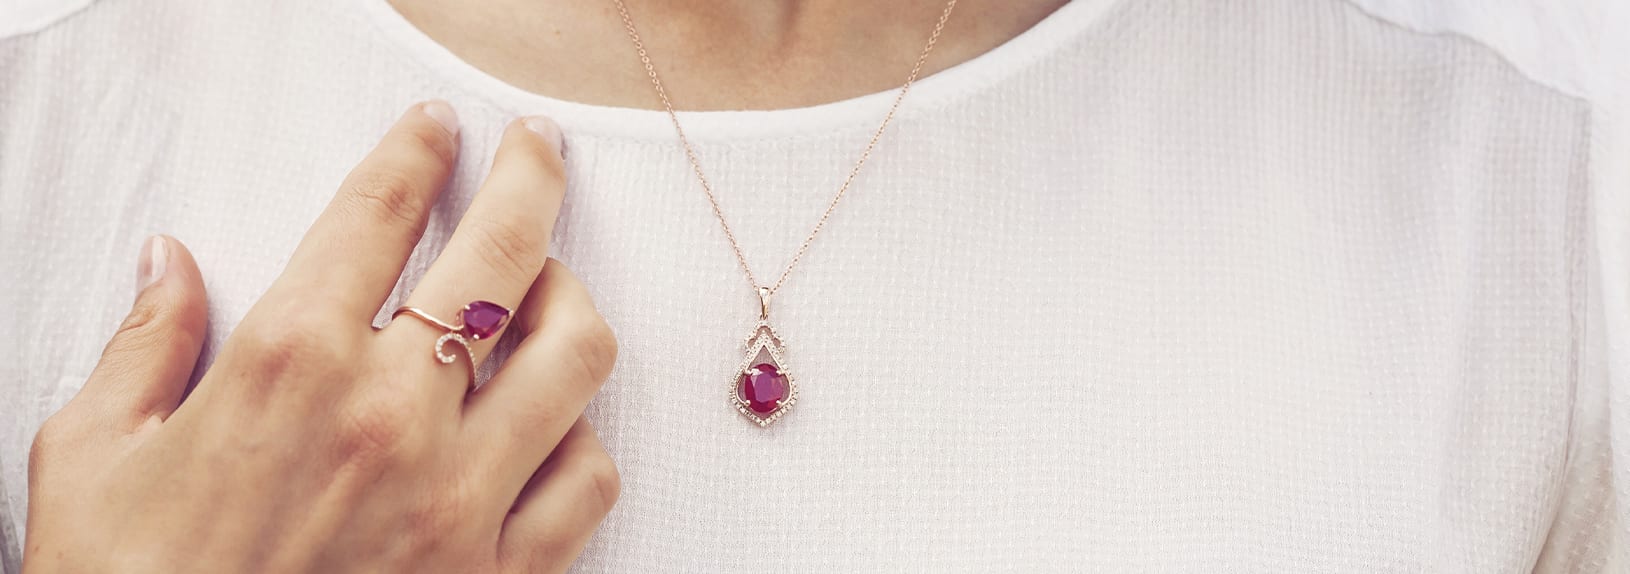 A necklace and ring featuring January's birthstone